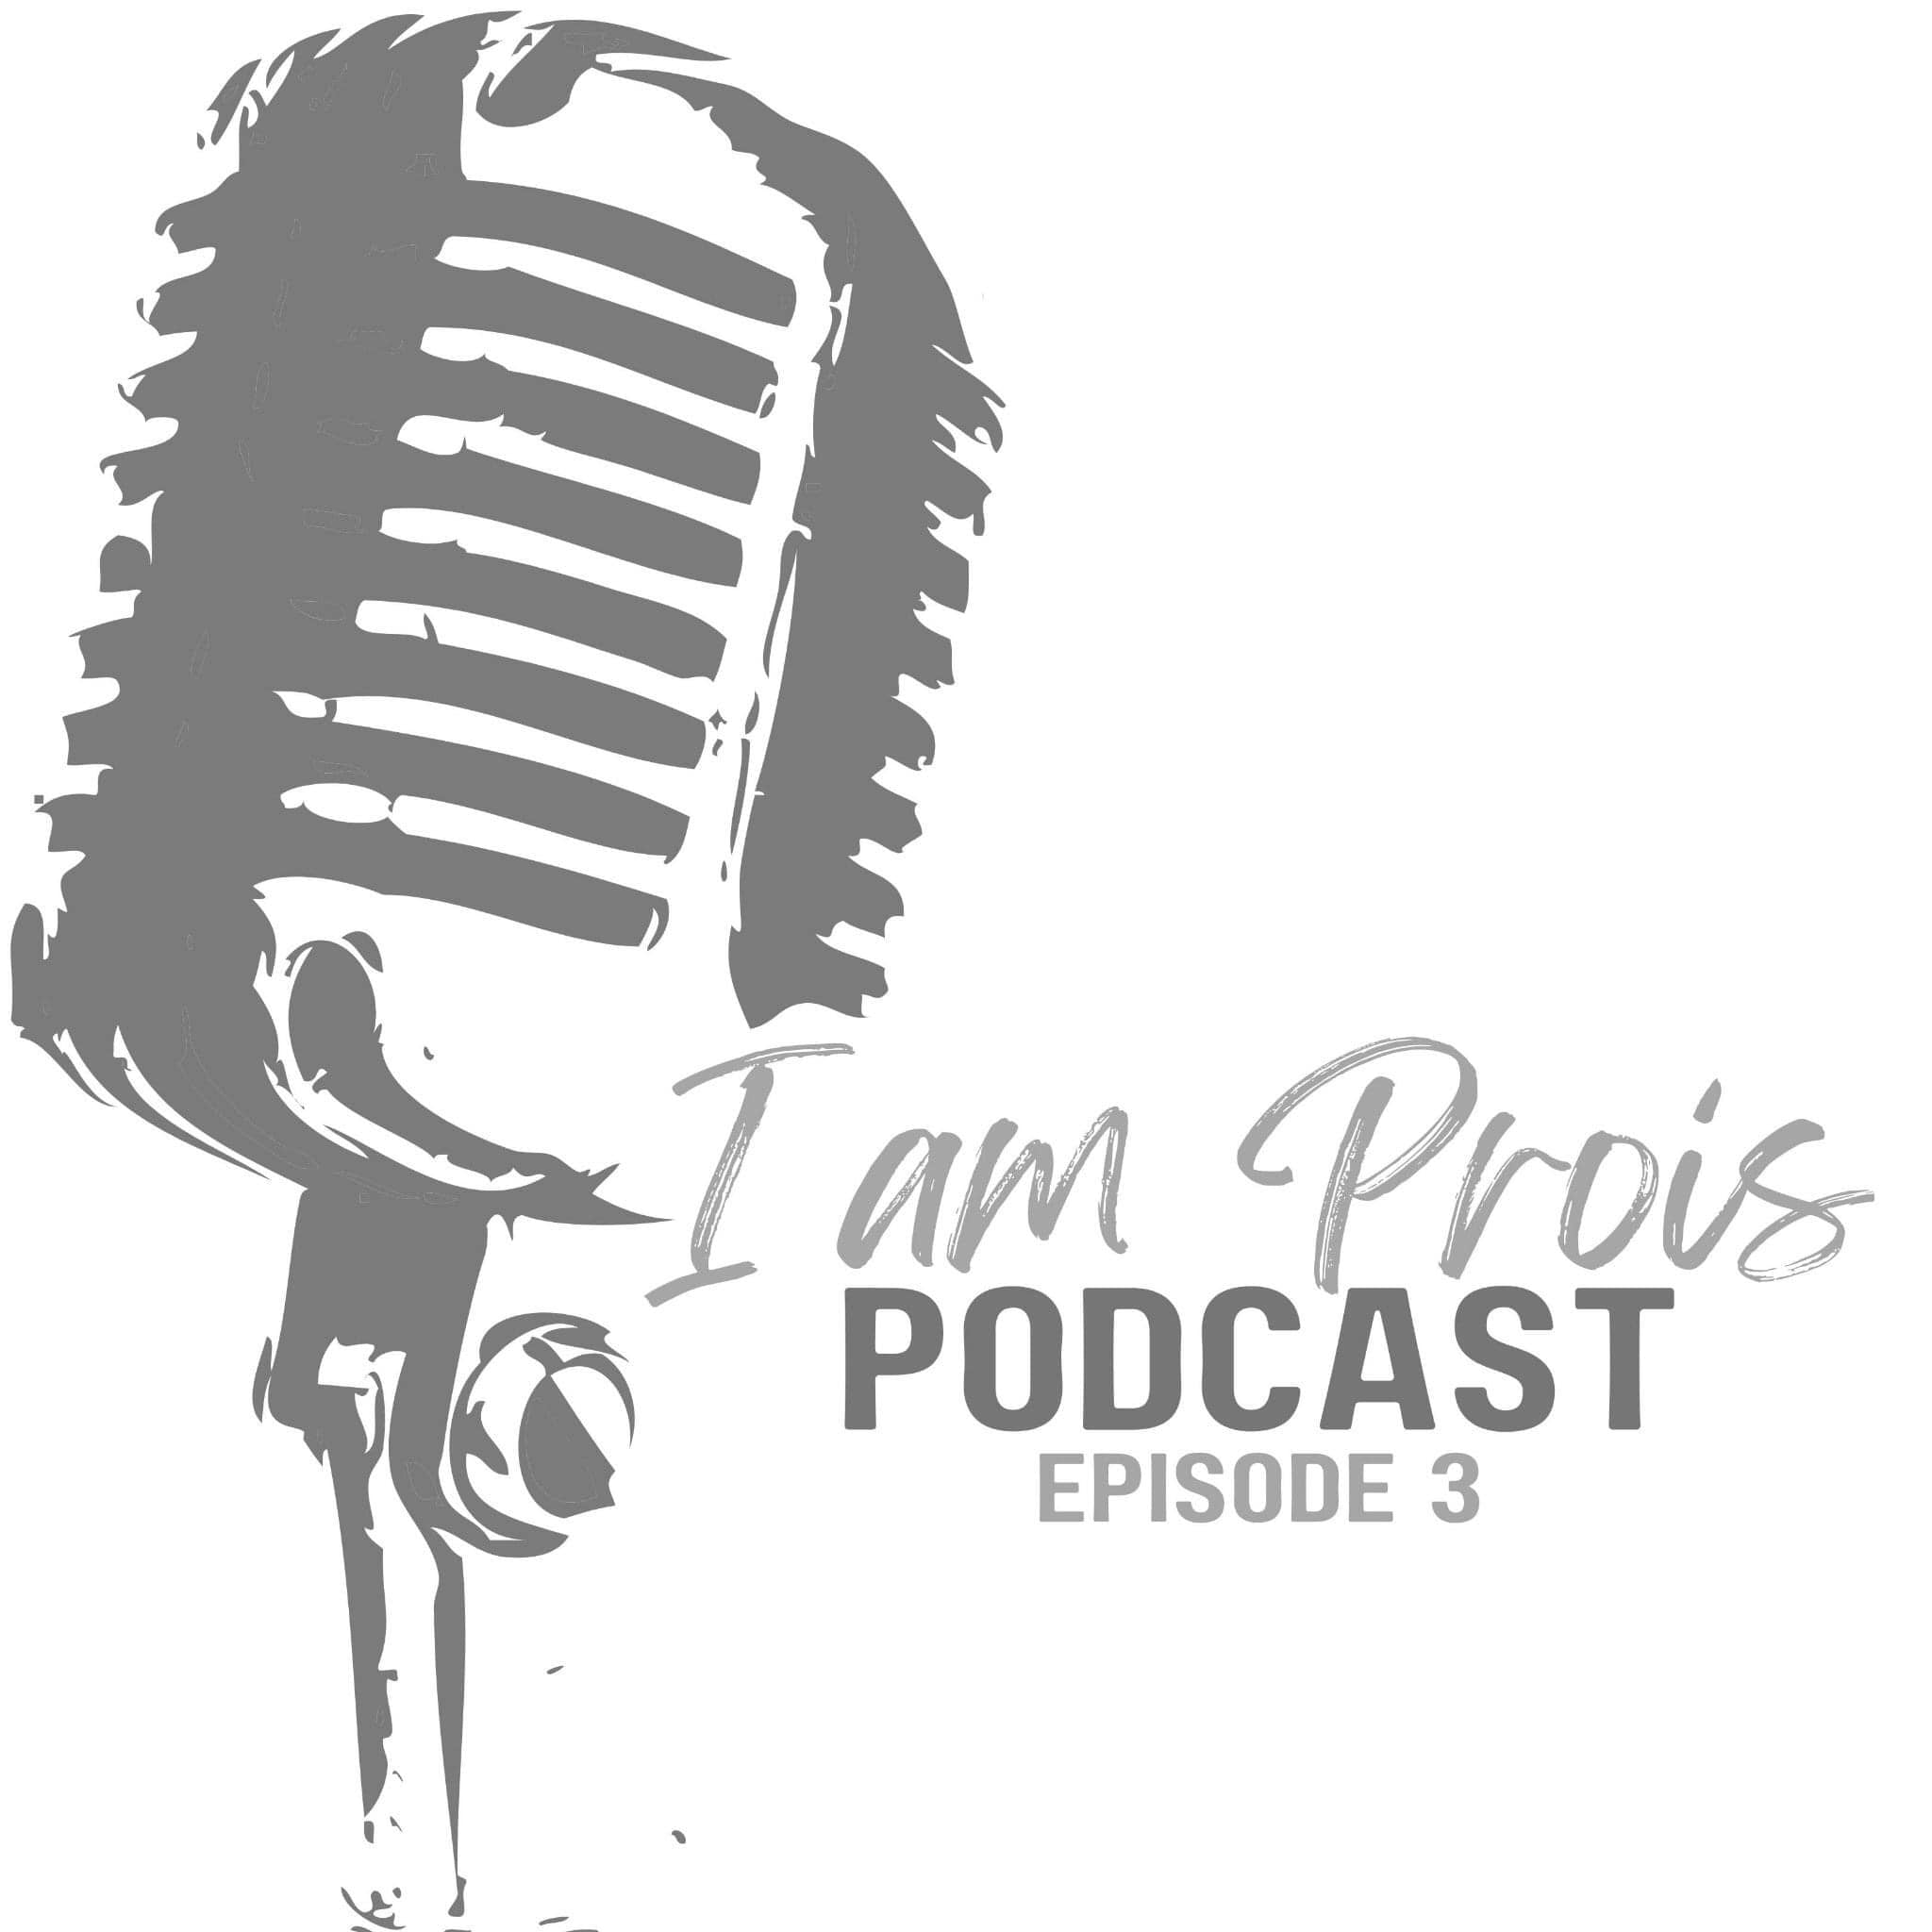 Tune In To Episode 3 of the I AM Prois Podcast!